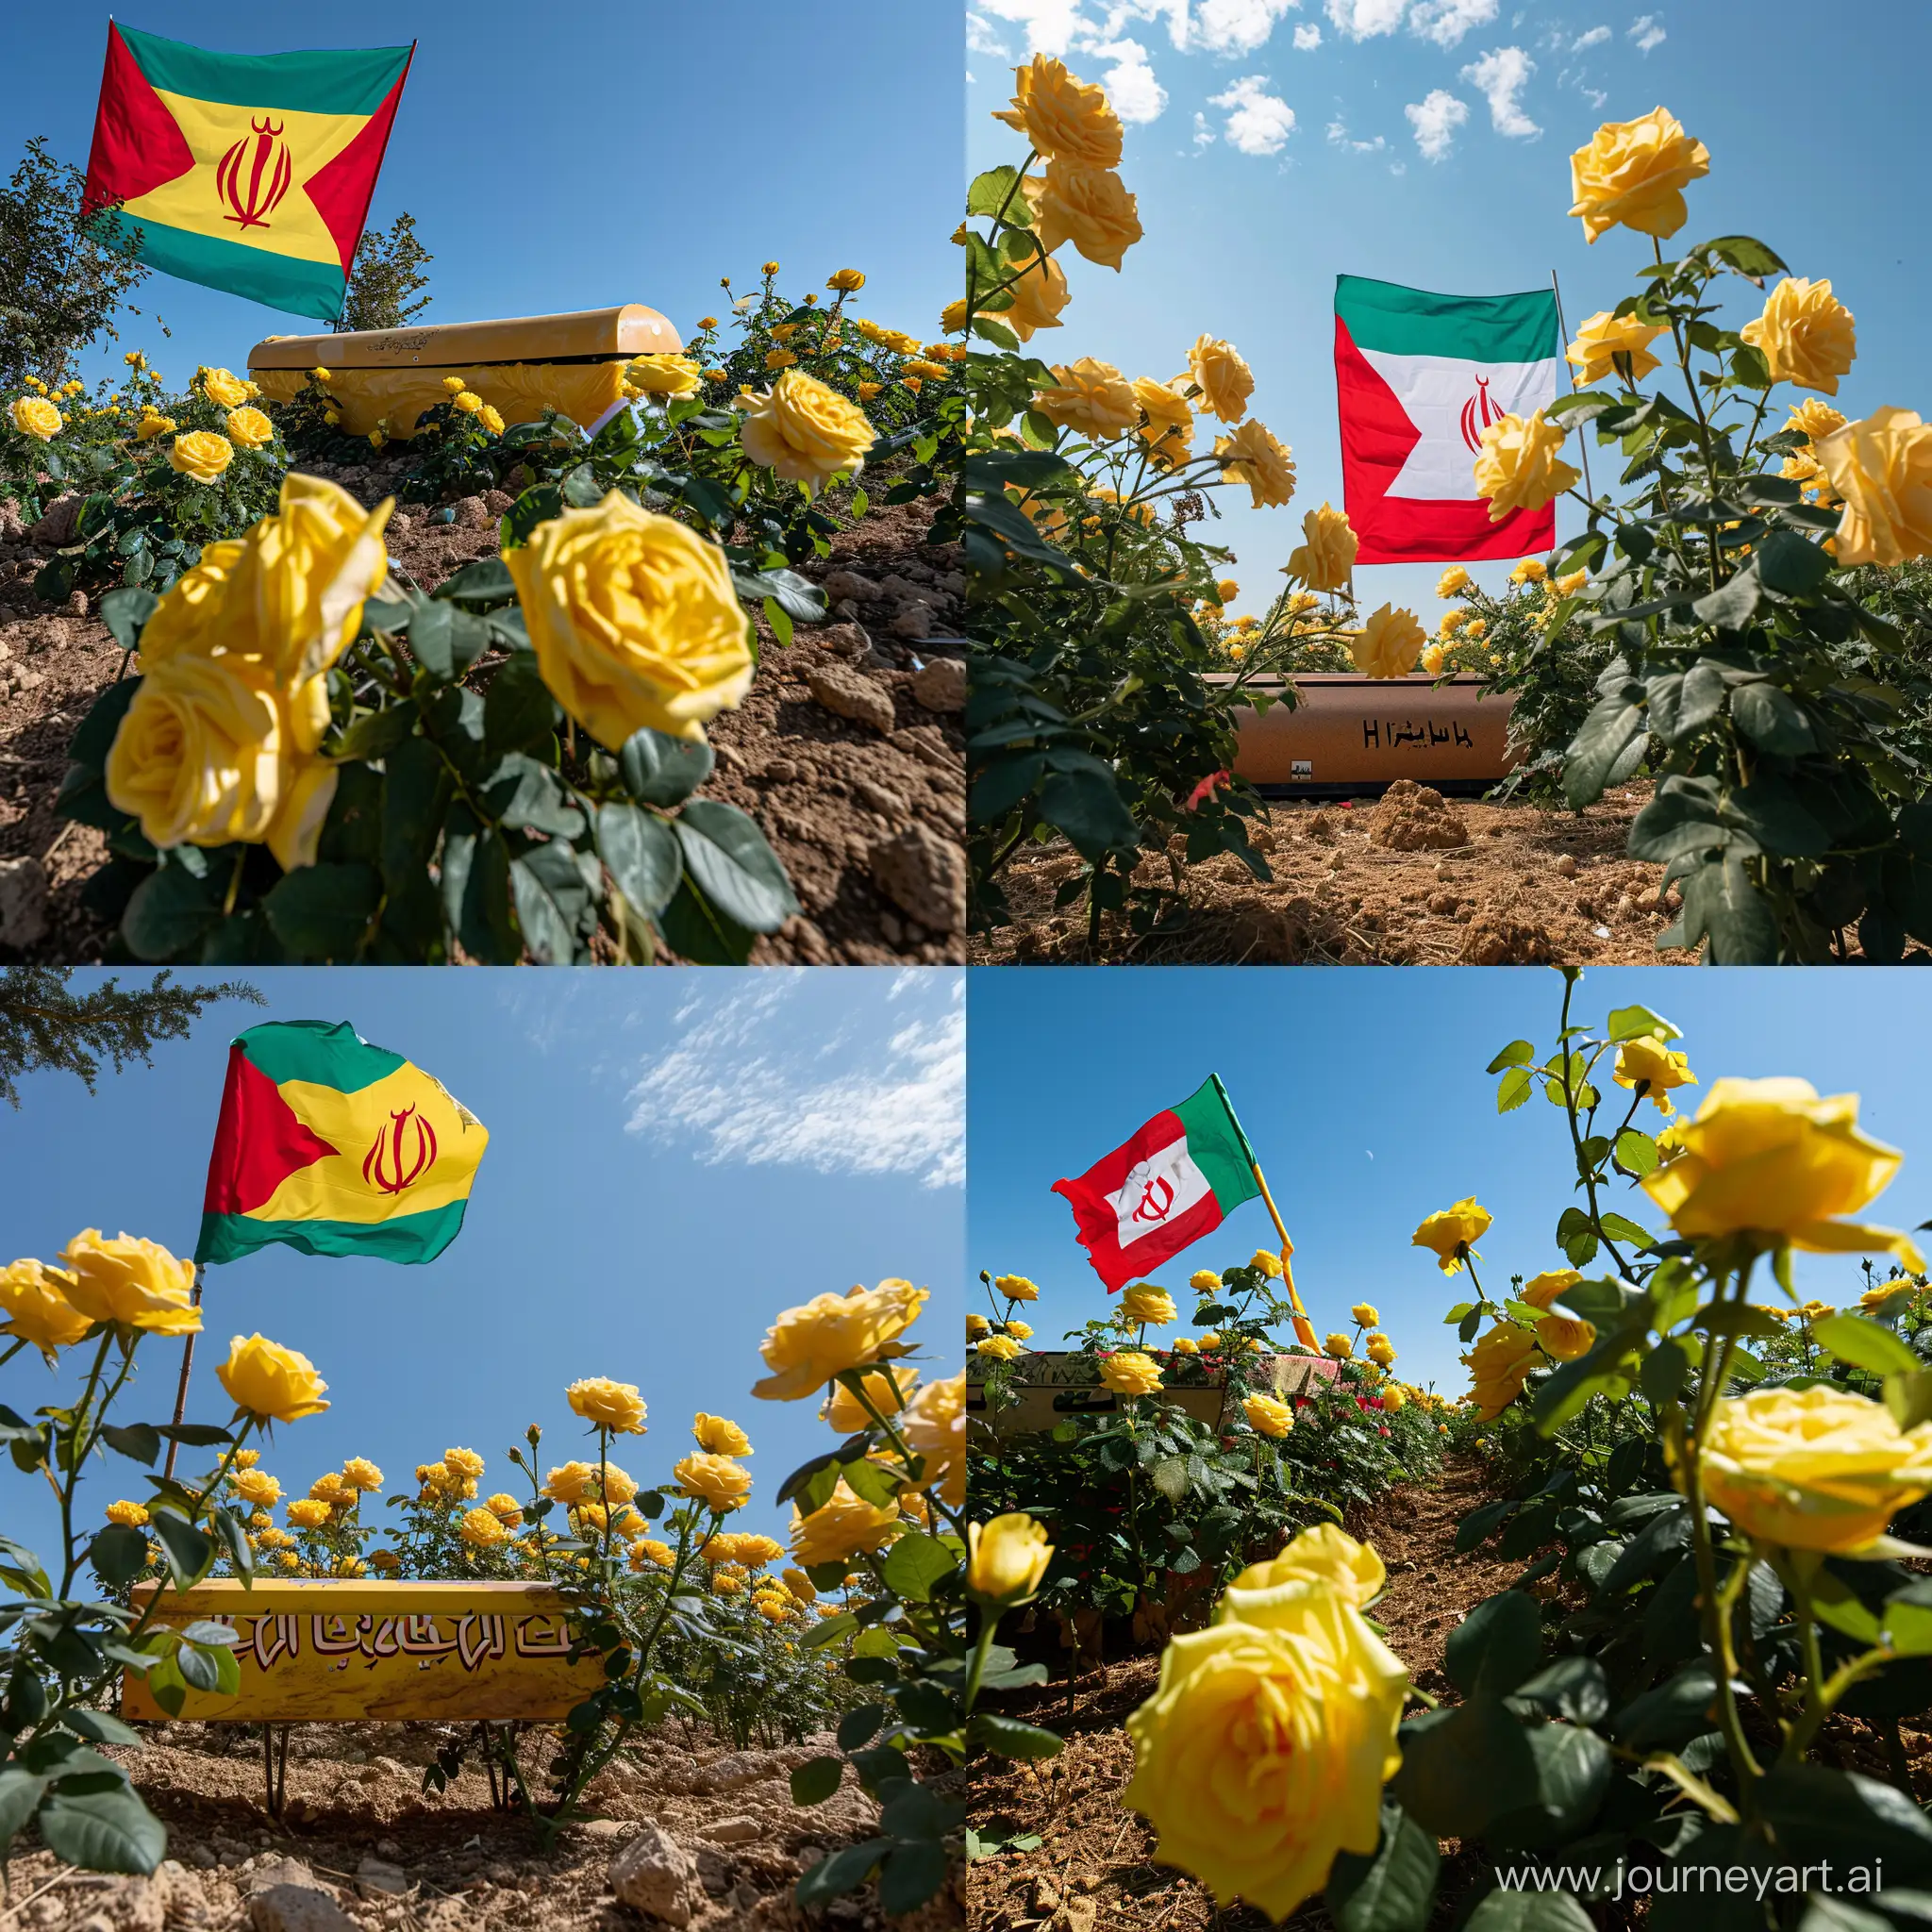 Hezbollah-Flag-Coffin-Surrounded-by-Yellow-Roses-Under-Blue-Sky